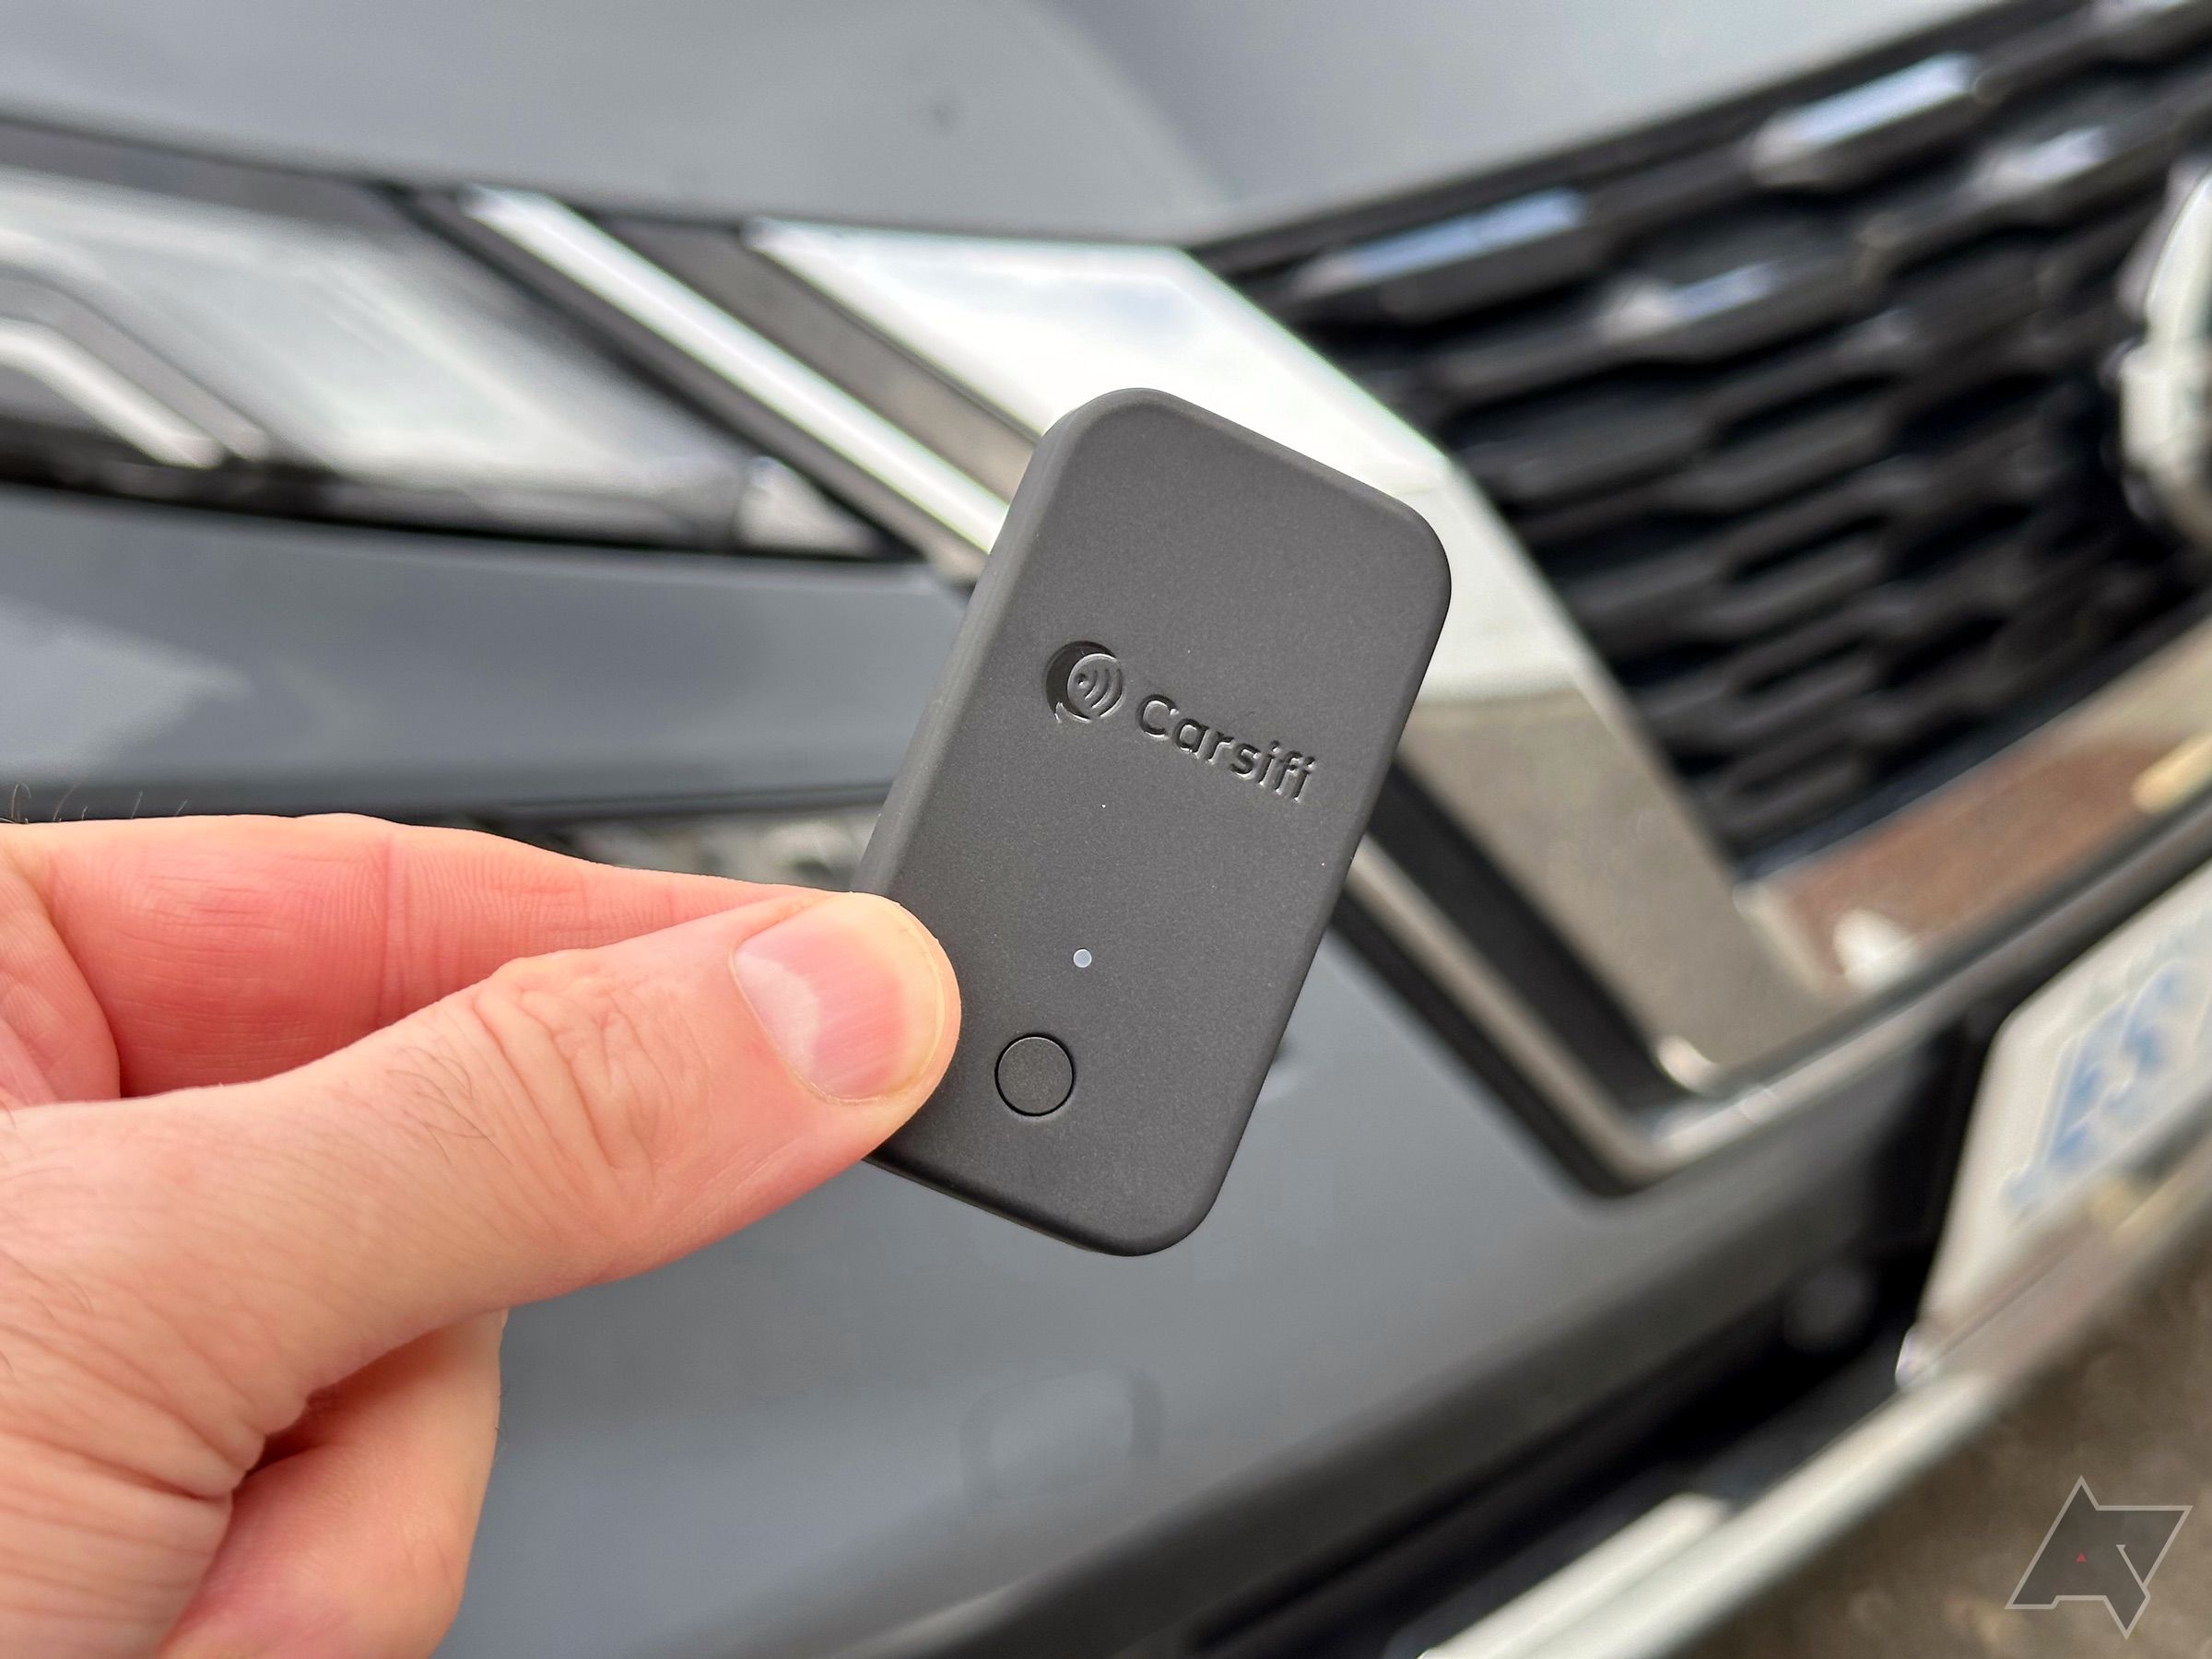 Carsifi Wireless Android Auto Adapter review: A smooth ride for some single-vehicle families